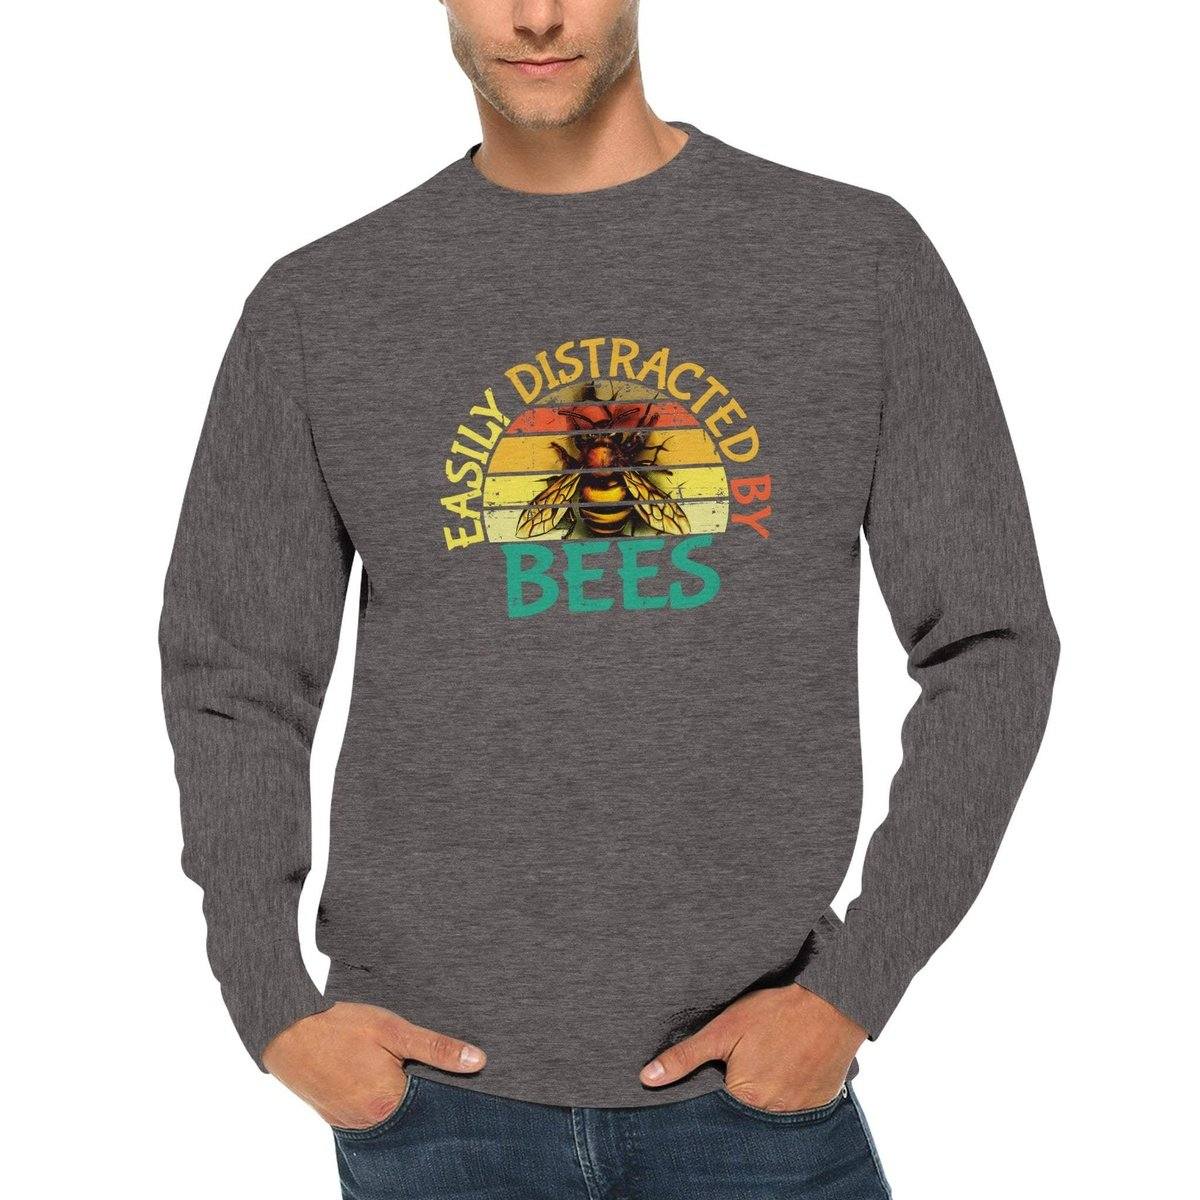 Easily Distracted By Bees Jumper - Retro Vintage Sunset - Premium Unisex Crewneck Sweatshirt Adults Jumpers Charcoal Heather / S Bee Clothing Australia